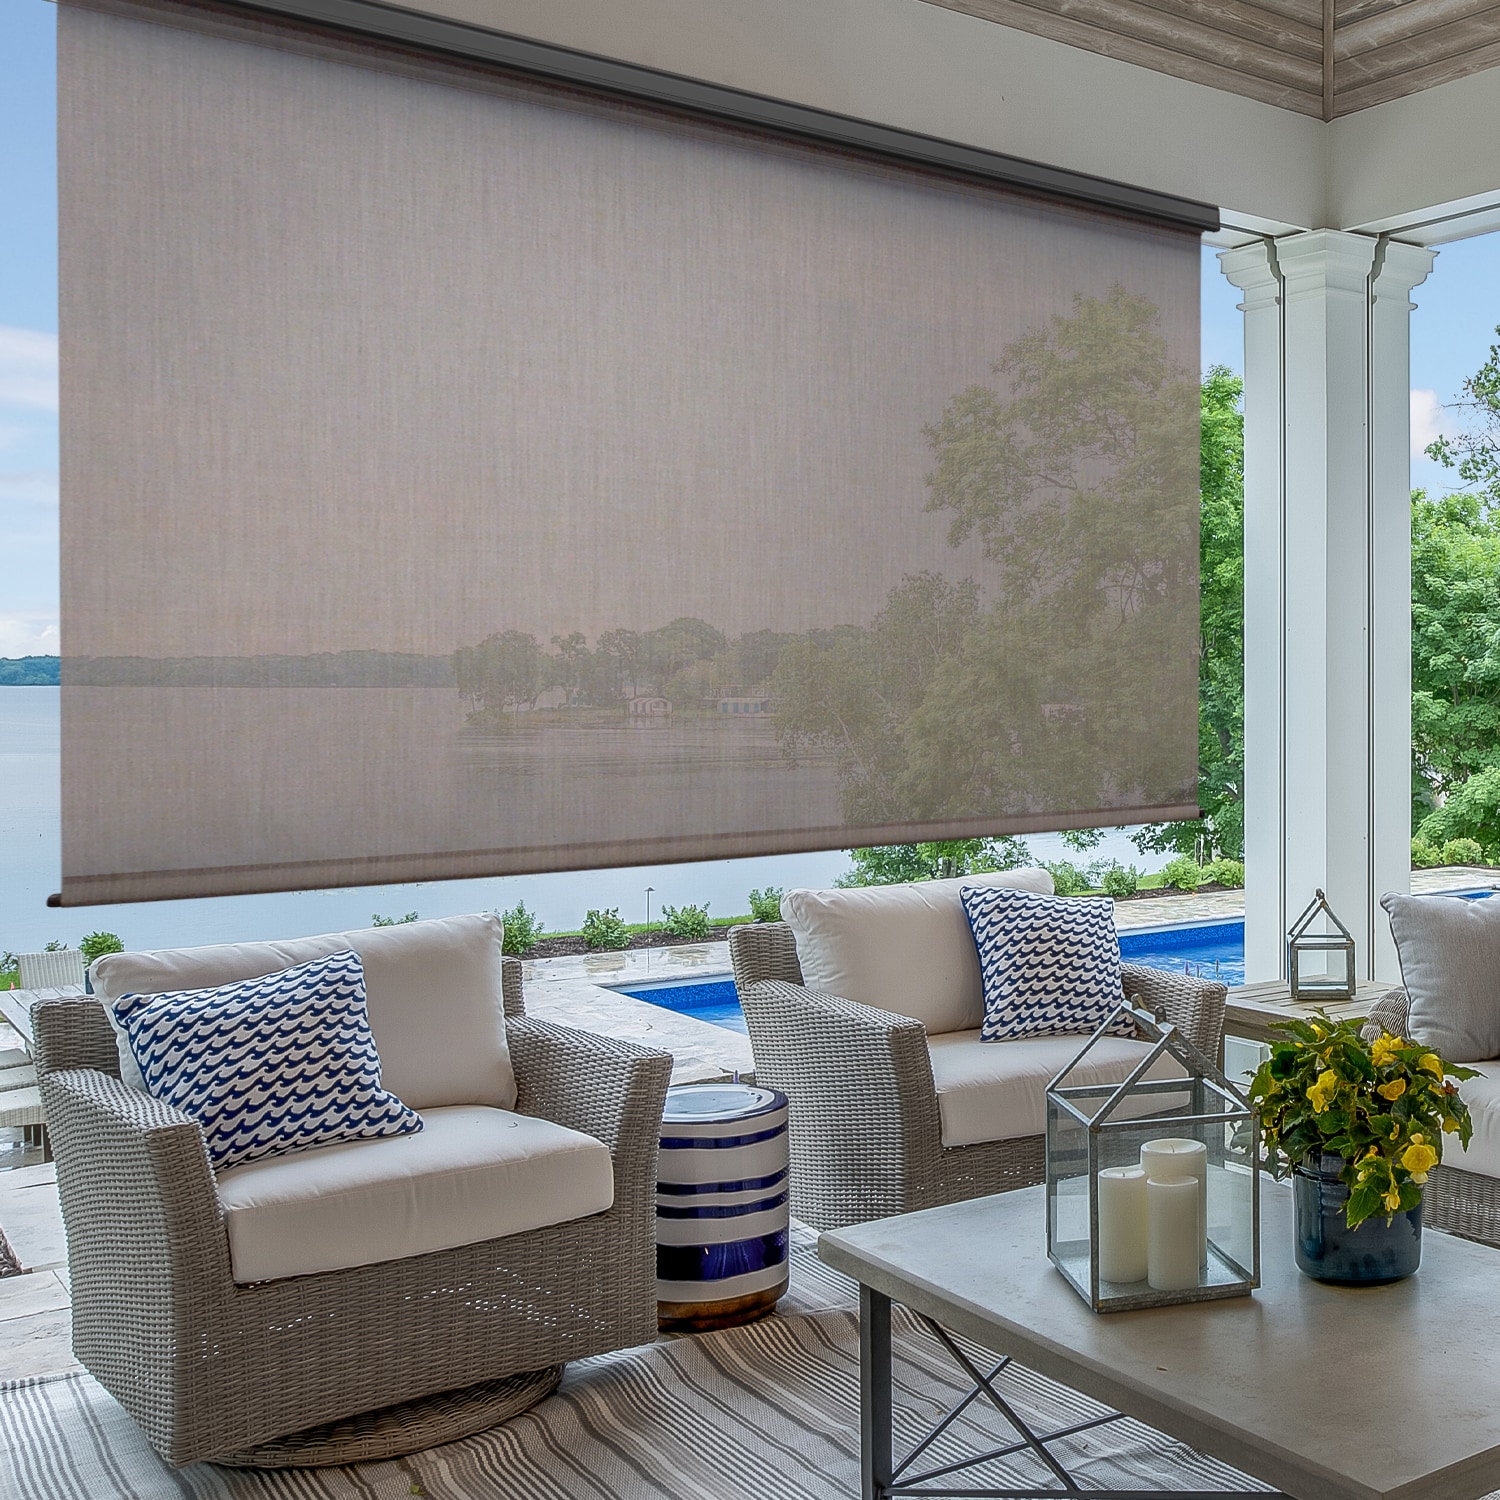 Kloster Det er billigt abstrakt Armor Ray 84-in x 96-in Sarasota Light Filtering Cordless Outdoor Roller  Shade in the Window Shades department at Lowes.com